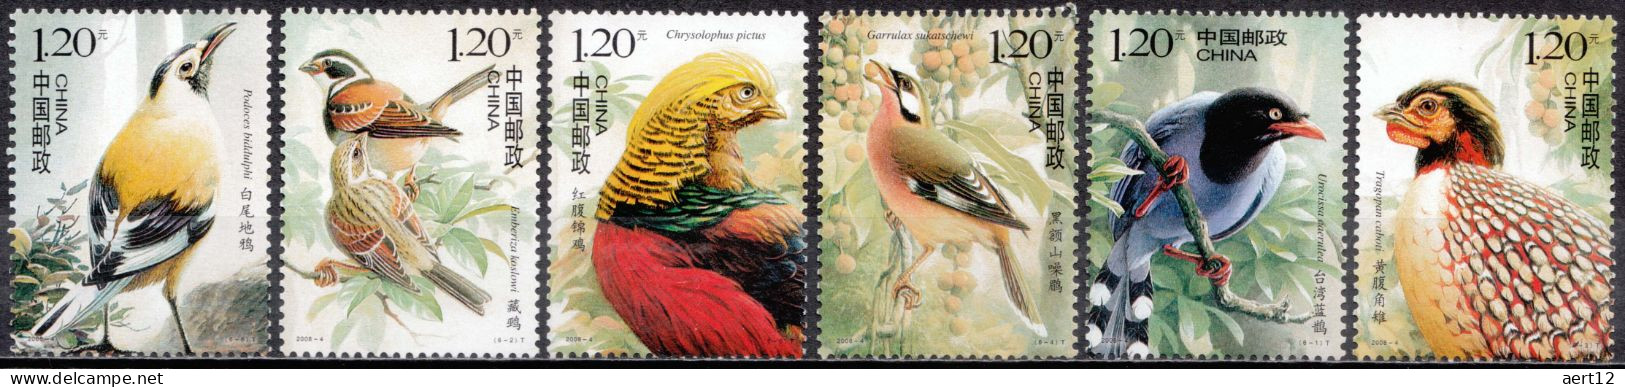 2008, China, People's Republic, Birds Of China, Animals, Birds, Pheasants, 6 Stamps, MNH(**), CN 3942-47 - Unused Stamps